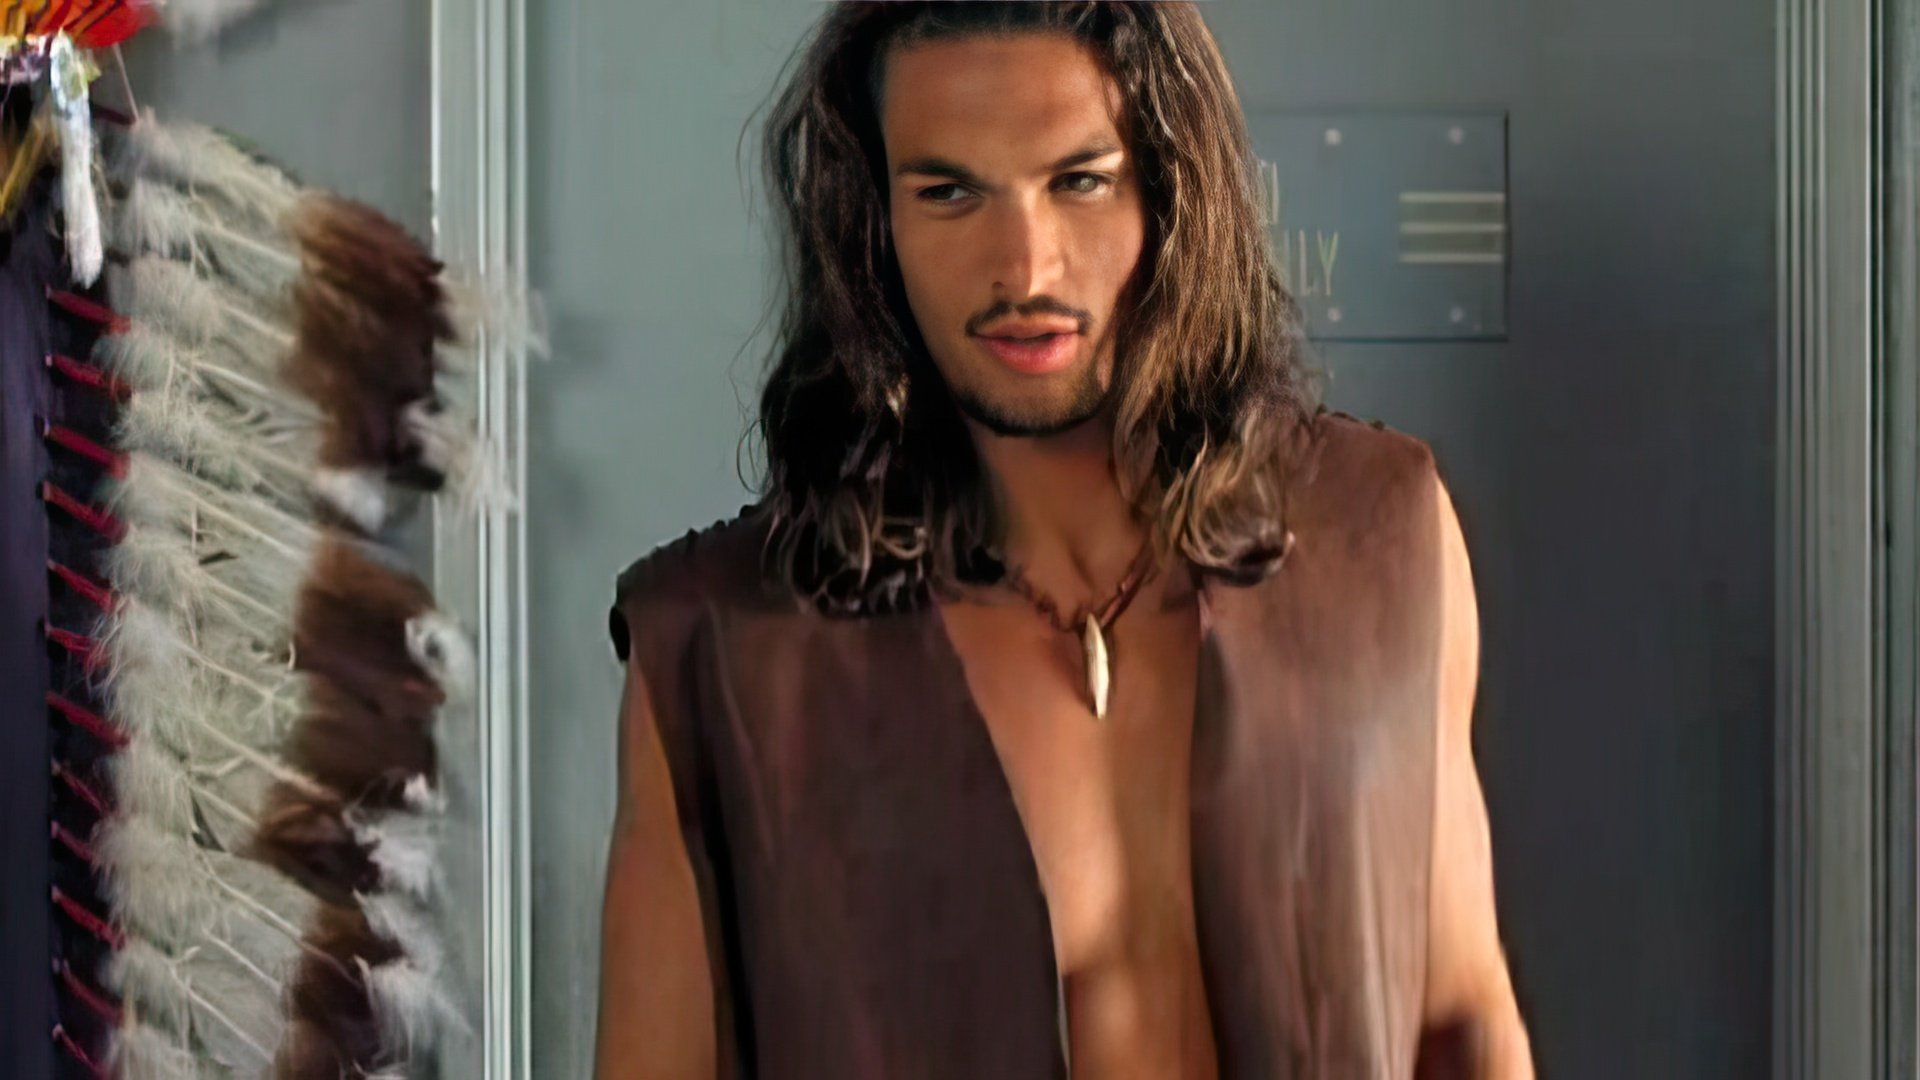 Momoa’s appearance in the movie Johnson Family Vacation